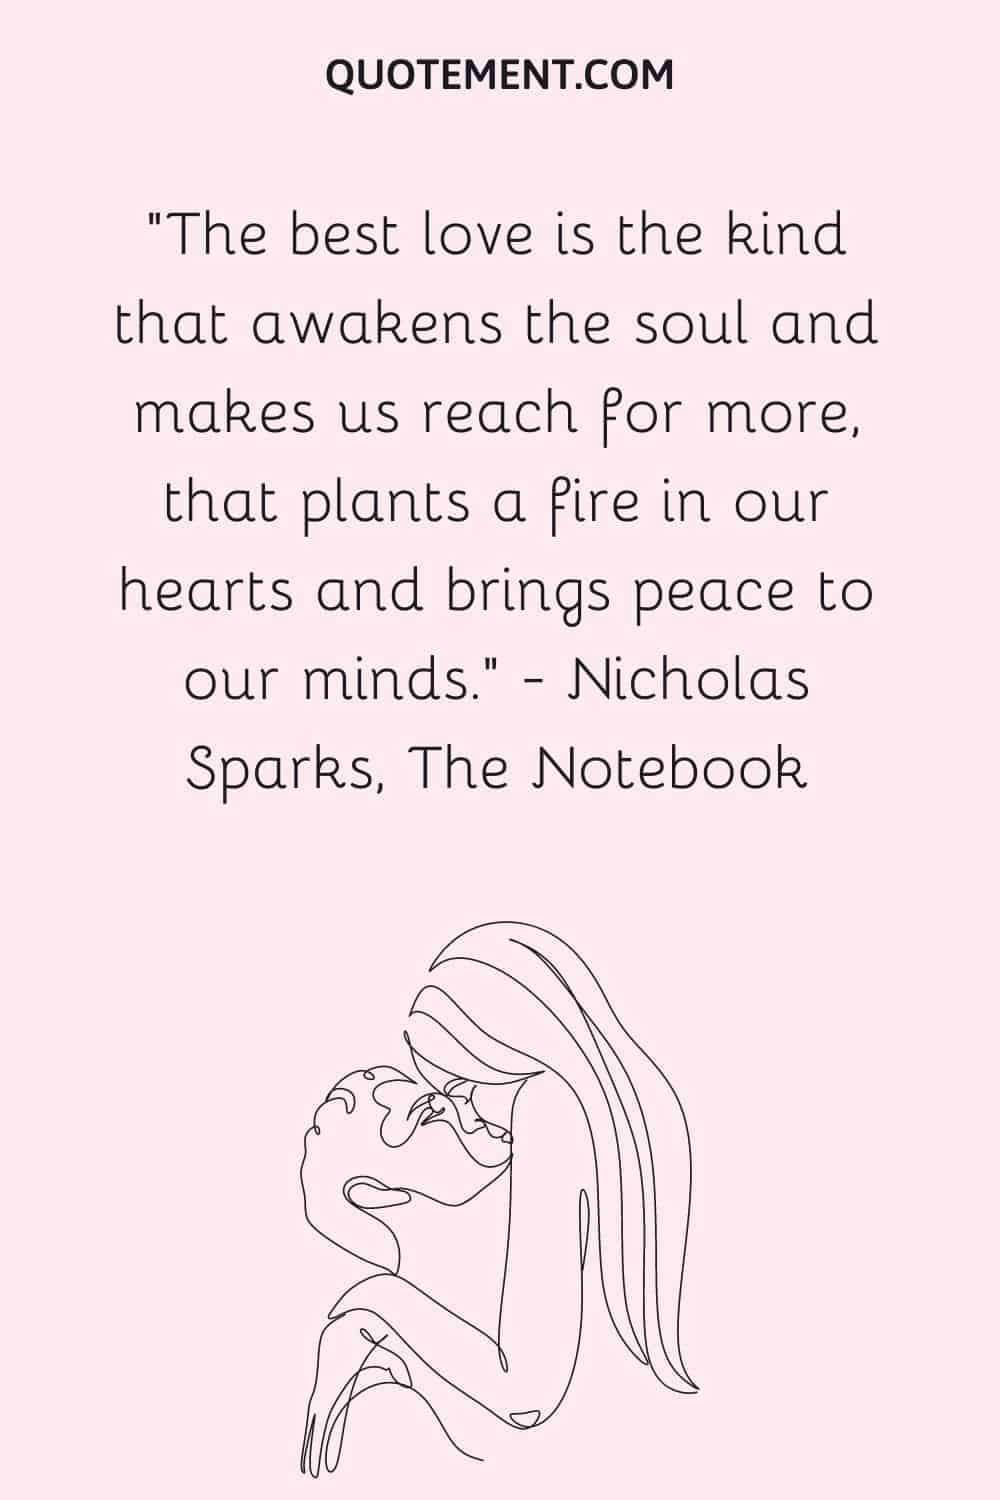 The best love is the kind that awakens the soul and makes us reach for more, that plants a fire in our hearts and brings peace to our minds. — Nicholas Sparks, The Notebook